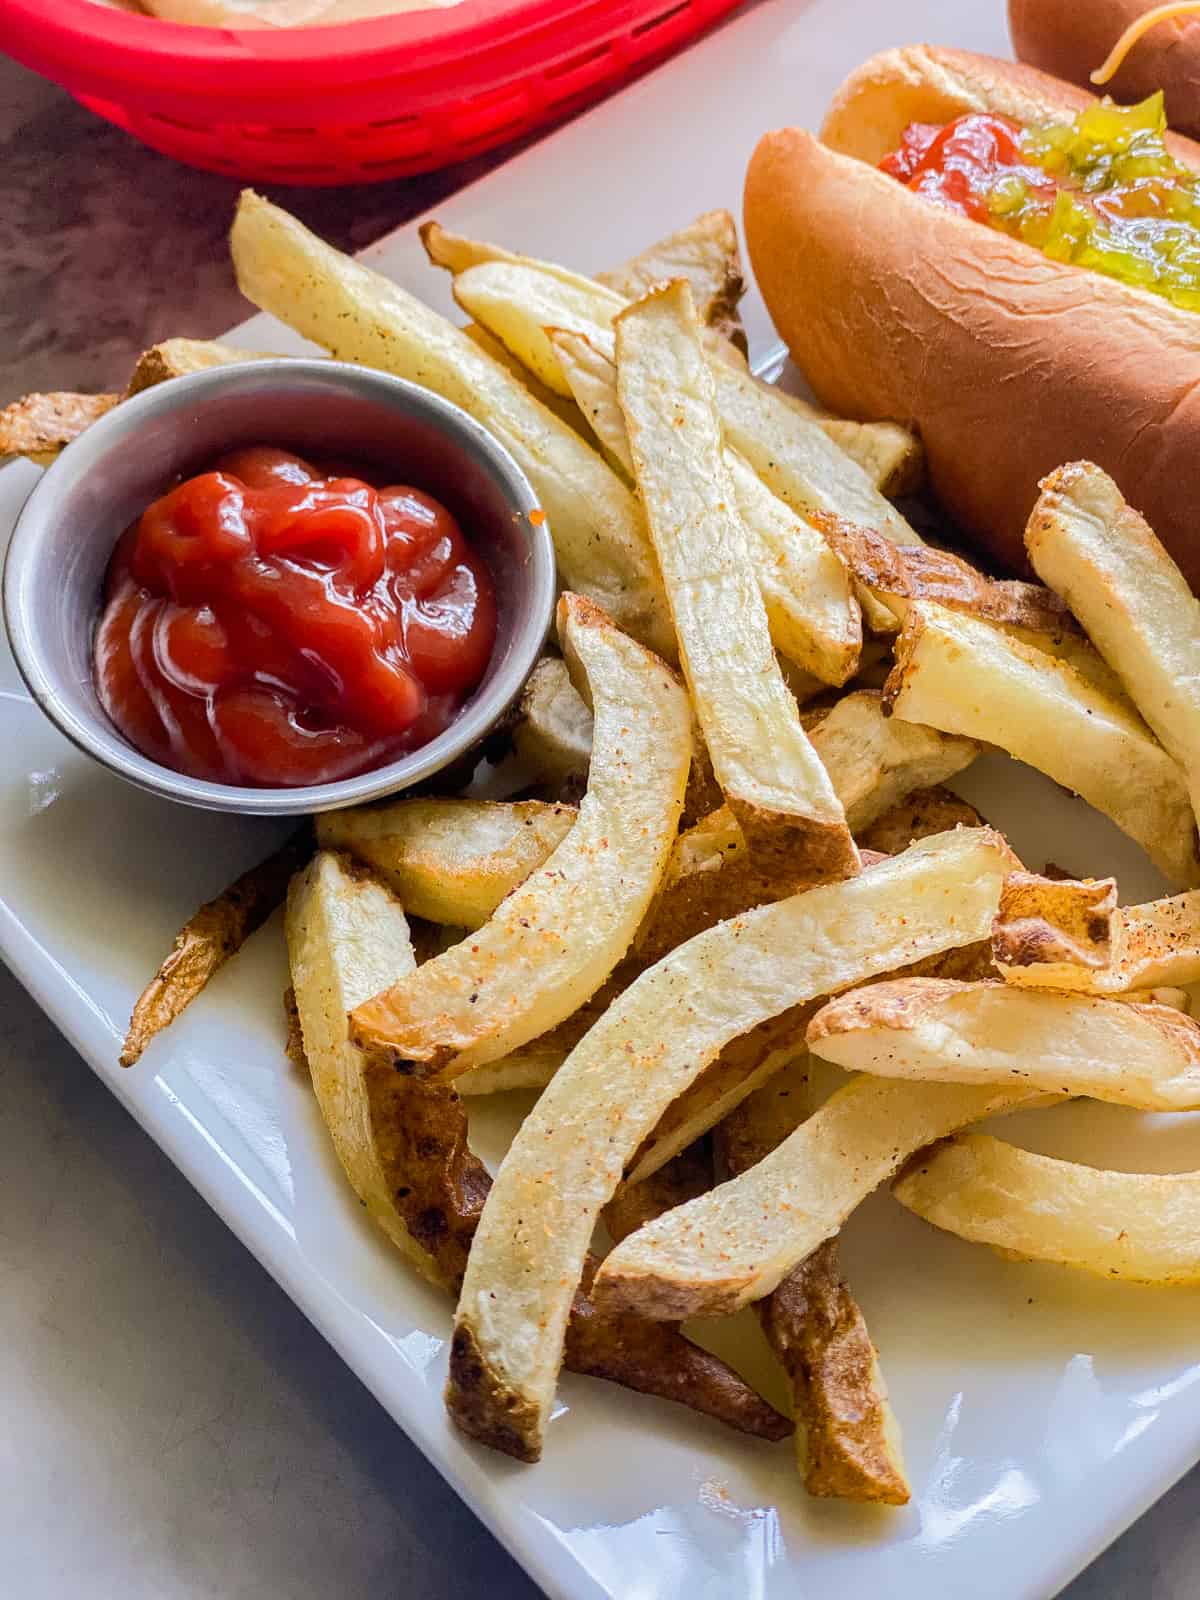 French fries on a white plate with a silver dipping cup of ketchup